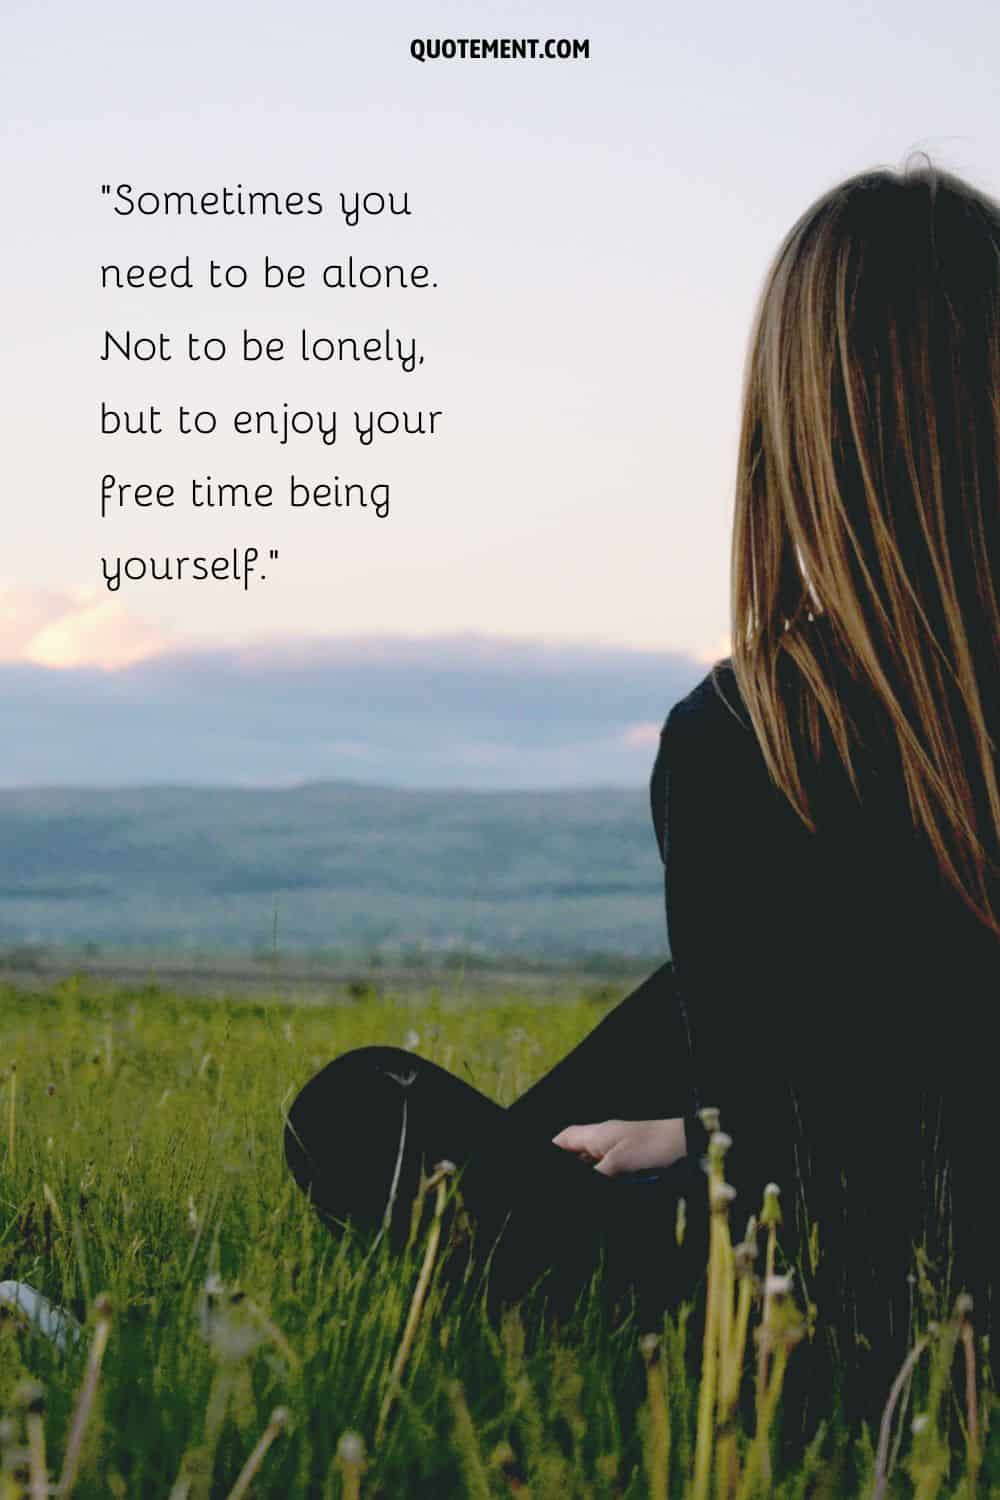 a girl sitting in nature representing enjoying time alone quote
